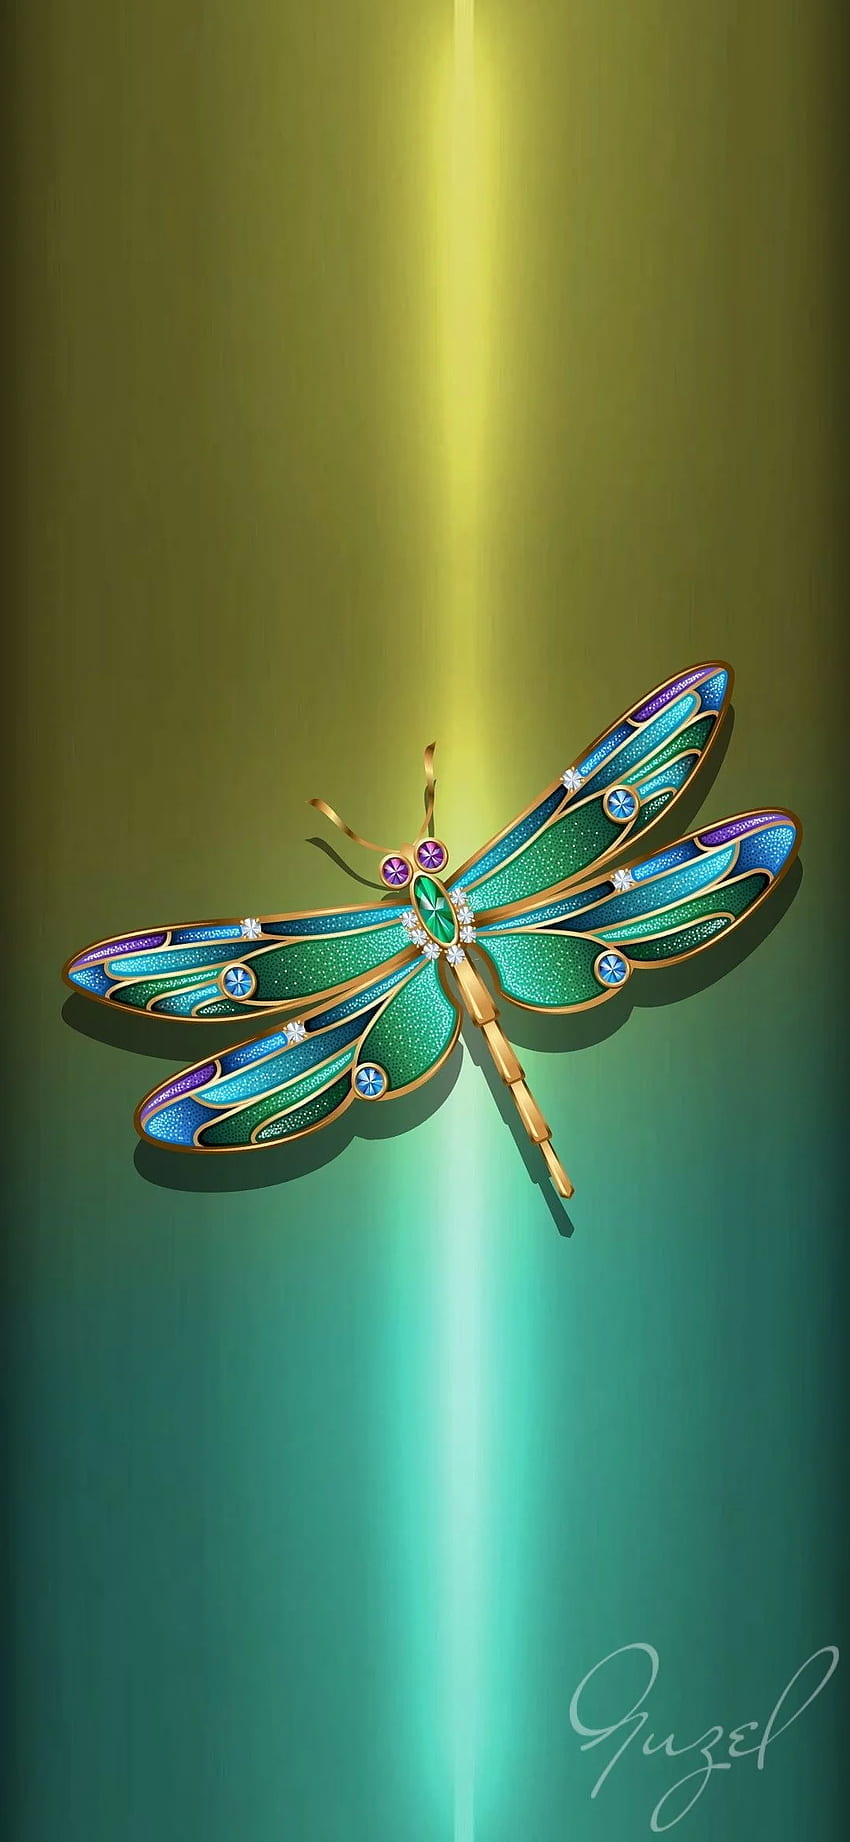 Made By Guzel. Apple watch , Dragonfly , Bling , Dragonfly Phone HD phone wallpaper